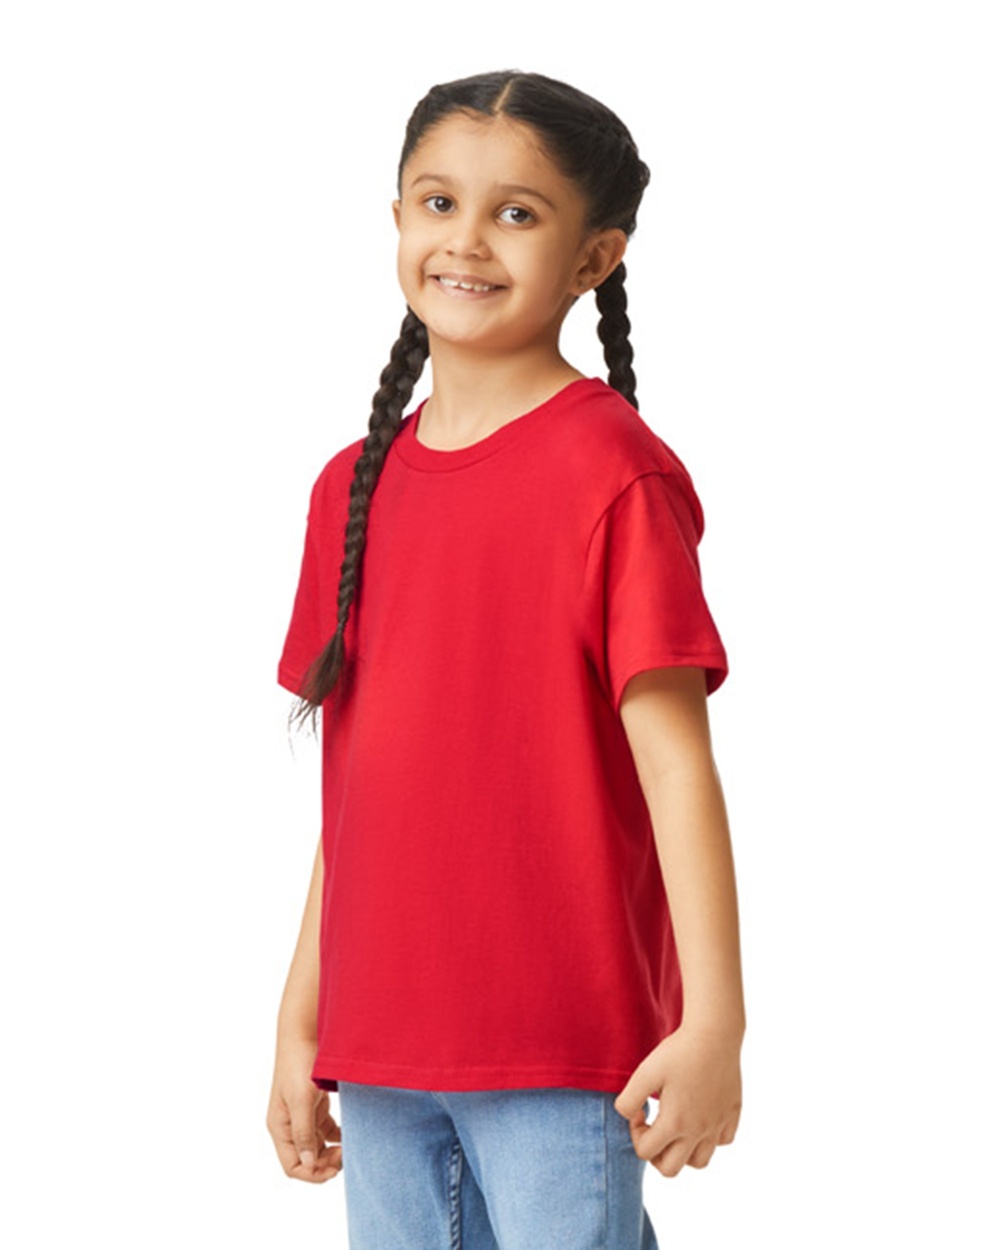 GD64000B - Softstyle® Youth T-Shirt - One Stop